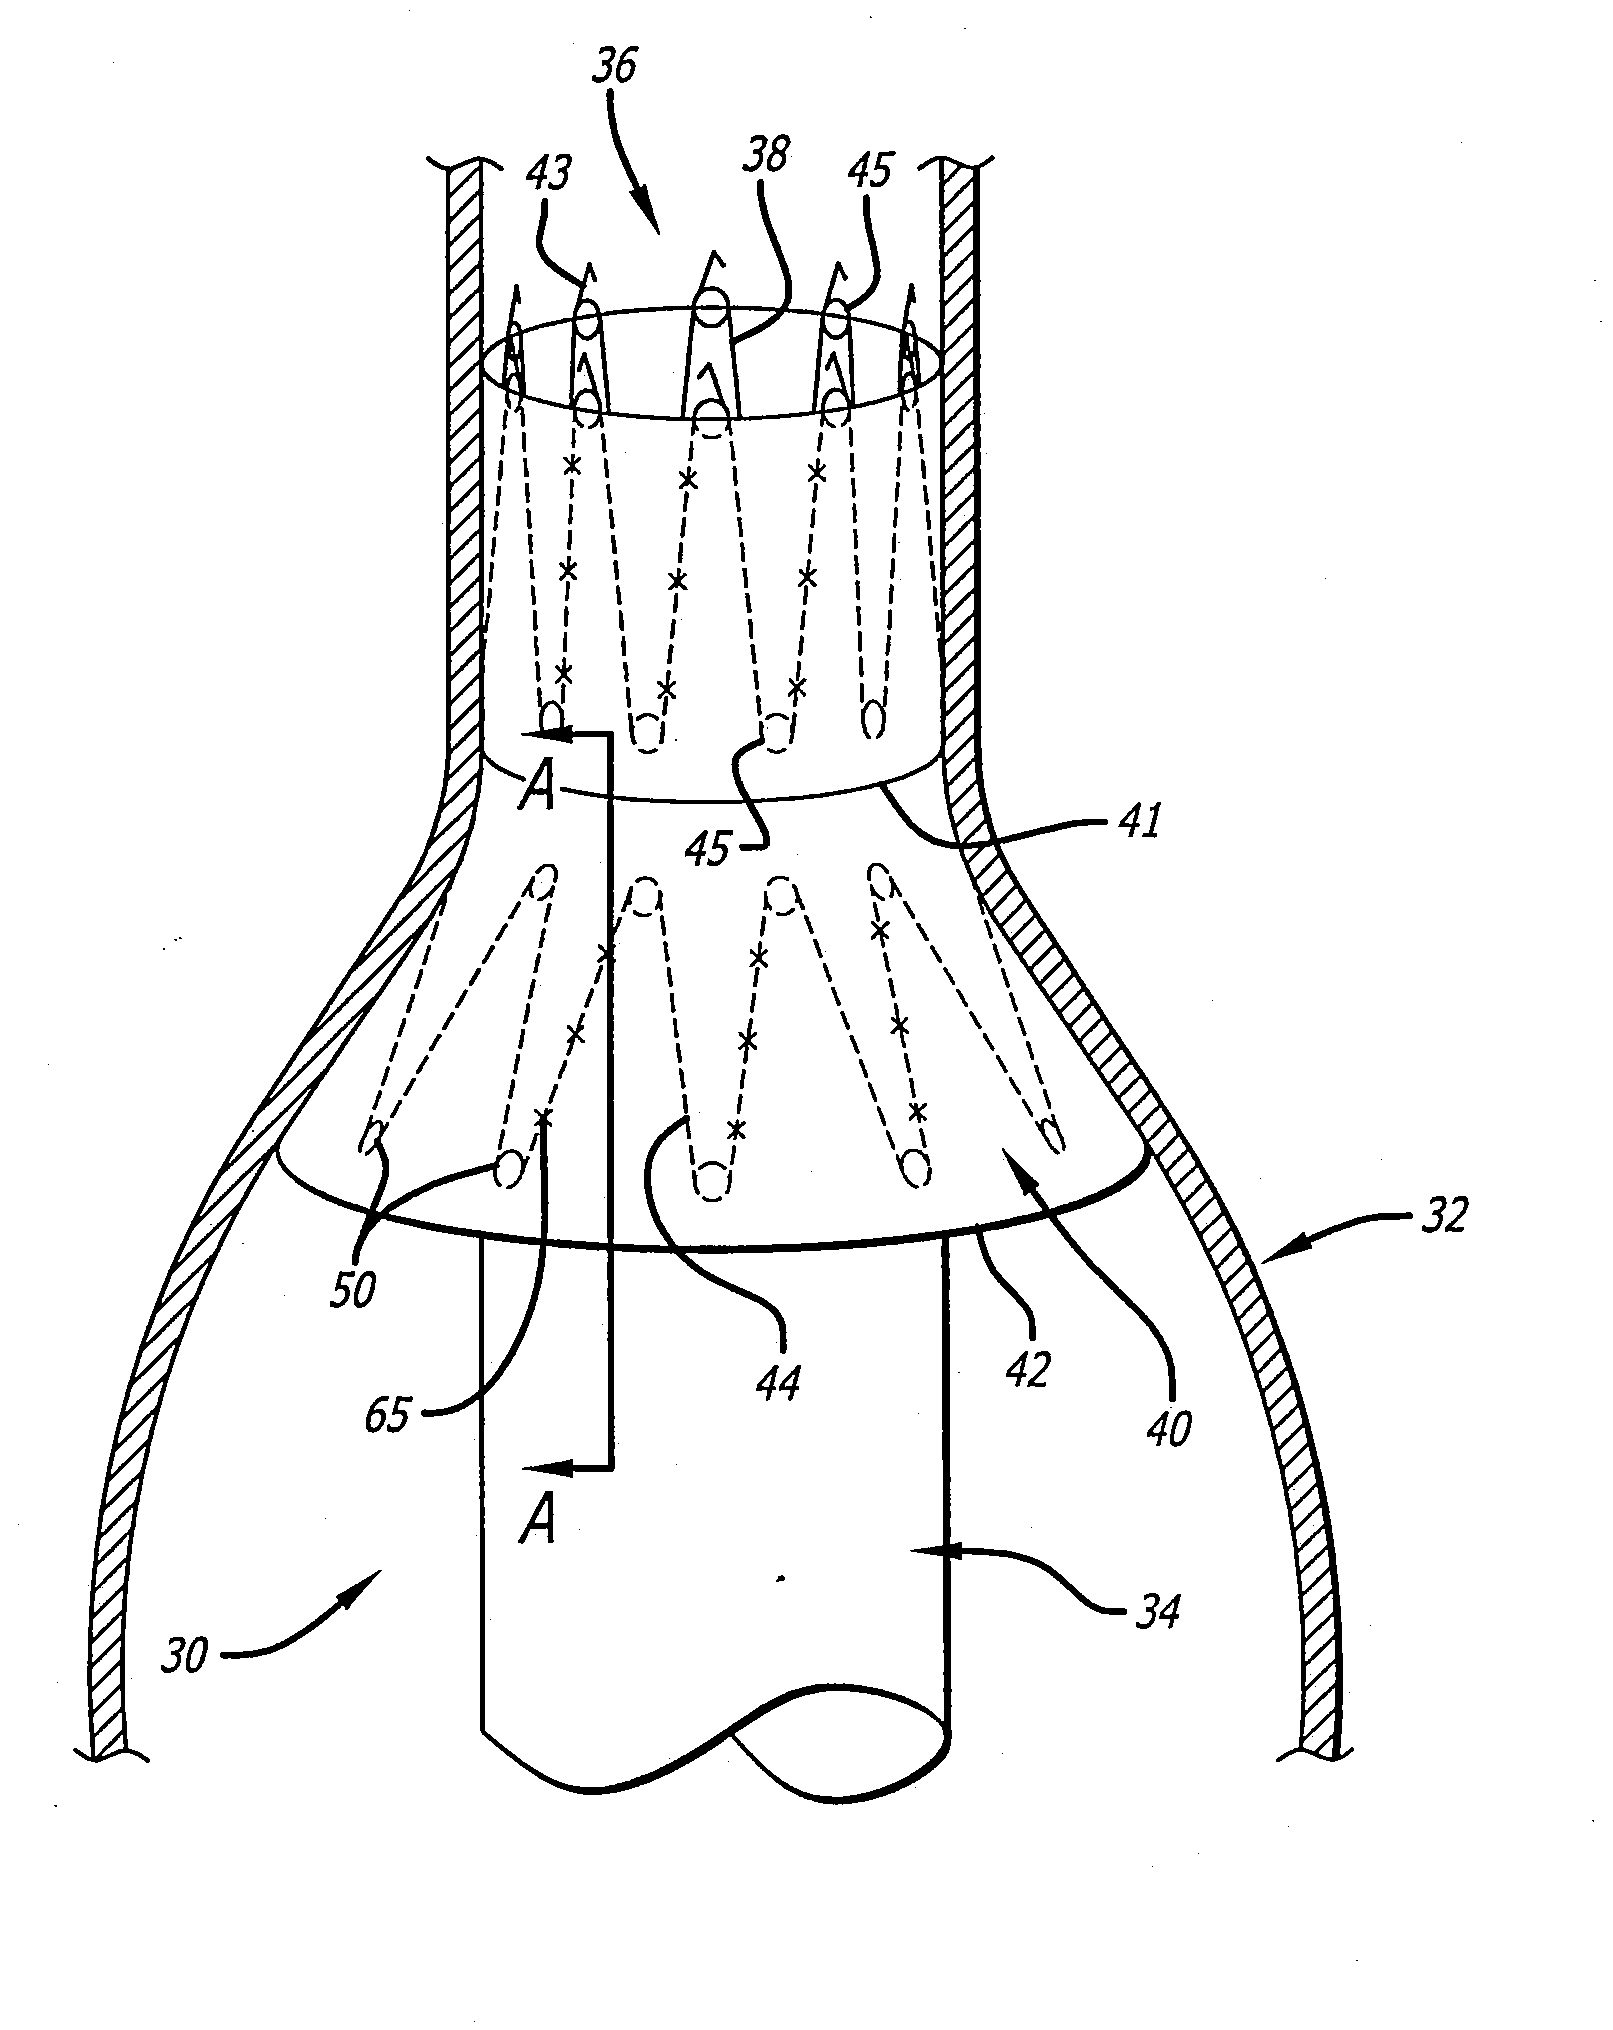 Endovascular graft for providing a seal with vasculature